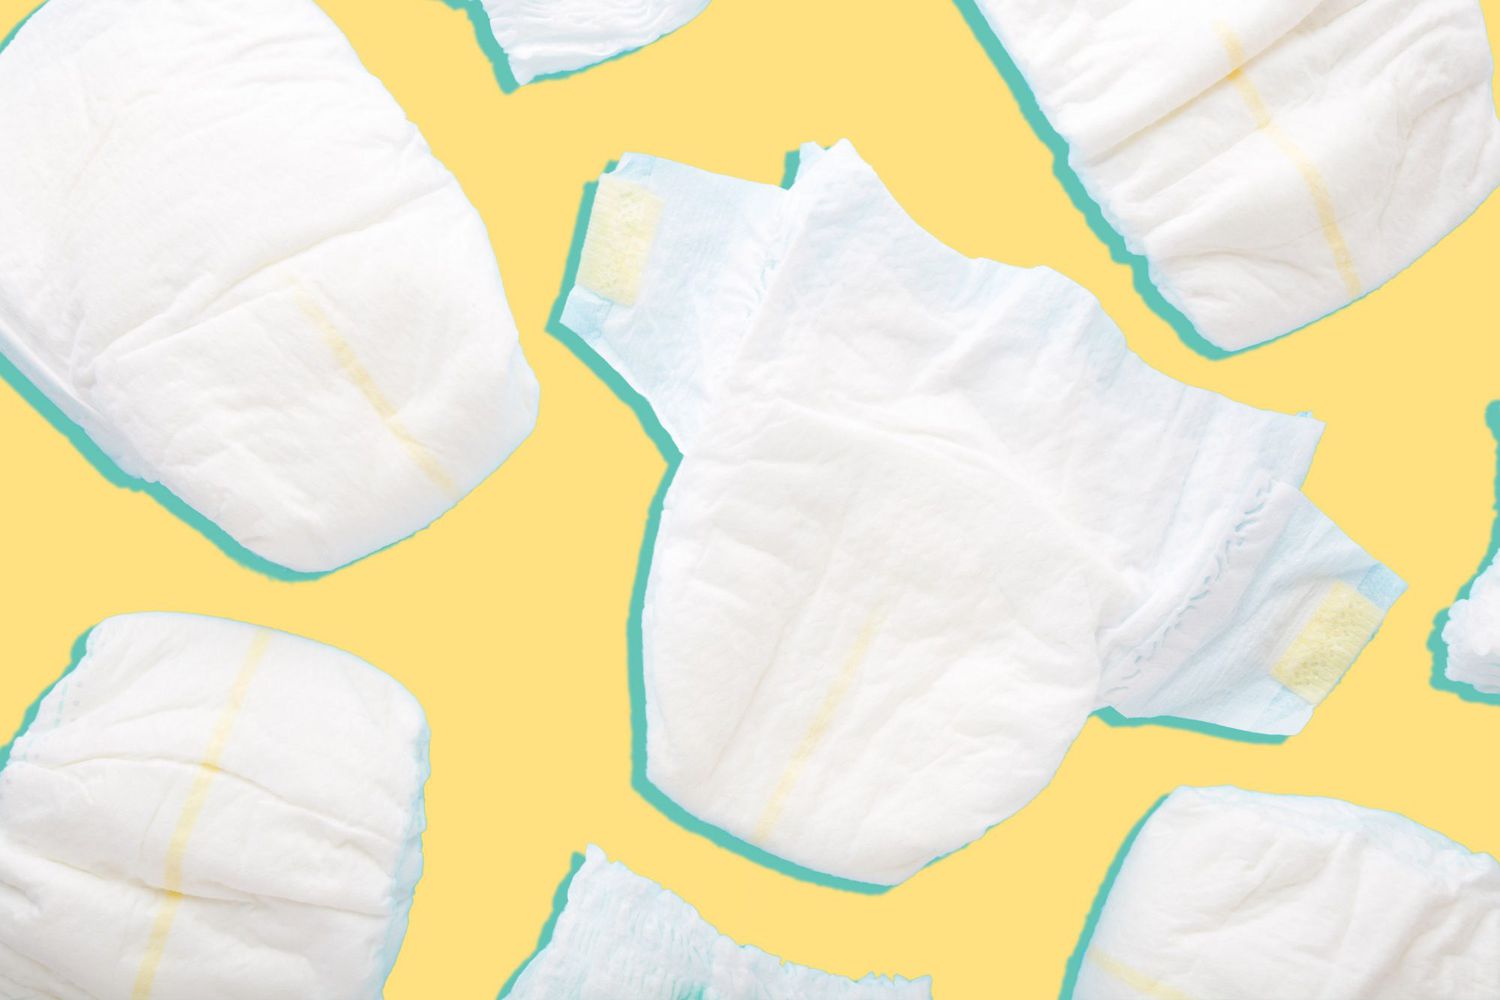 A graphic image of diapers on a colorful background.